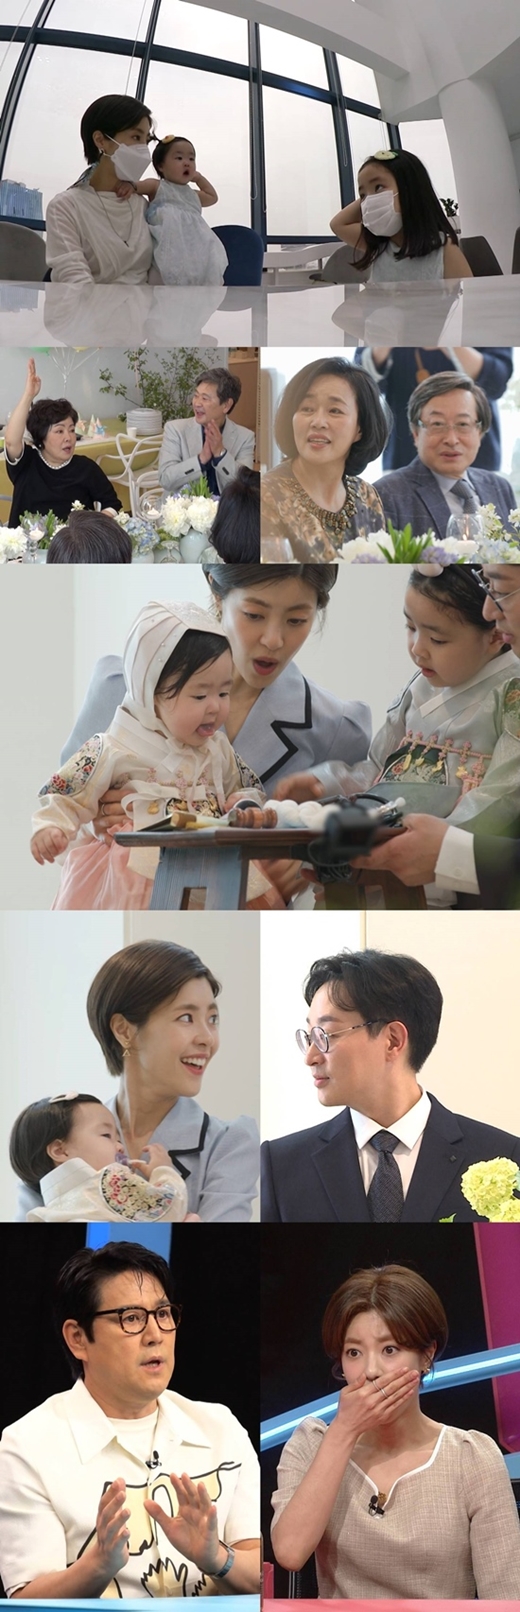 (Same Bed, Different Dreams 2: You Are My Dest)Lee Yoon-ji, Jung Han-wool will appear as a special fate couple in SBS Same Bed, Different Dreams 2 Season 2 - You Are My Destiny.Lee Yoon-ji, Jung Han-ul, is a special fate couple and finds you are my destiny for a long time.On the 17th broadcast, Lee Yoon-ji, Jung Han-uls daughters Rani and Soul will be revealed to experience the first bitter taste of life (?).Lee Yoon-ji headed somewhere with her daughters Rani and Soul, who could not hide their tension in the strange space they had been to for the first time in their lives.In addition, when Father appeared in the question place, it was the back door that I was surprised by the unexpected appearance of Jung Han-ul in the studio that watched the sisters as well as the sisters.The sisters were increasingly nervous about what they had been through for the first time in their lives.Jung Han-ul was embarrassed by the sound of the children, and it is said that he watched Lee Yoon-ji with his heart.A few days later, Lee Yoon-ji and Jung Han-ul set up a place with their parents in commemoration of the second souls stone.Unlike his family members who had a natural hung DNA, including actor Lee Yoon-ji, Trot Emperor Park Hyun Bin, song instructor and mother, his father-in-law and pharmacists mother-in-law from dentistry formed a dramatic atmosphere with a calm and quiet tendency.As this atmosphere continued, Jung Han-ul led the delightful atmosphere by showing off the dancing skills that he had hidden in the middle of the gathering of the family members.MCs who watched this said, It has changed a lot and Mr. Jung Han-ul has now adapted.After the daughter Souls stonework progressed, Lee Yoon-ji and Jung Han-wool had a strange nervous battle.Actors Lee Yoon-ji and Physician Jung Han-ul have prepared microphones and stethoscopes that symbolize their own jobs.Even Jung Han-ul has coordinated the position of this on the stone. Indeed, her daughter Soul hopes what she would have caught in the stone.Meanwhile, Byeon Woo-Min, who was in the studio with Special MC, said, I decided to appear because of Lee Yoon-ji.A special affection for Lee Yoon-ji (?Byeon Woo-Min, who revealed the story, said to Lee Yoon-ji that he would be with me when life is difficult and shocked all performers.It is the back door that even showed great affection while there was no one-sided, and once again surprised everyone.You Are My Destiny airs at 10:15 p.m. on Thursday night.